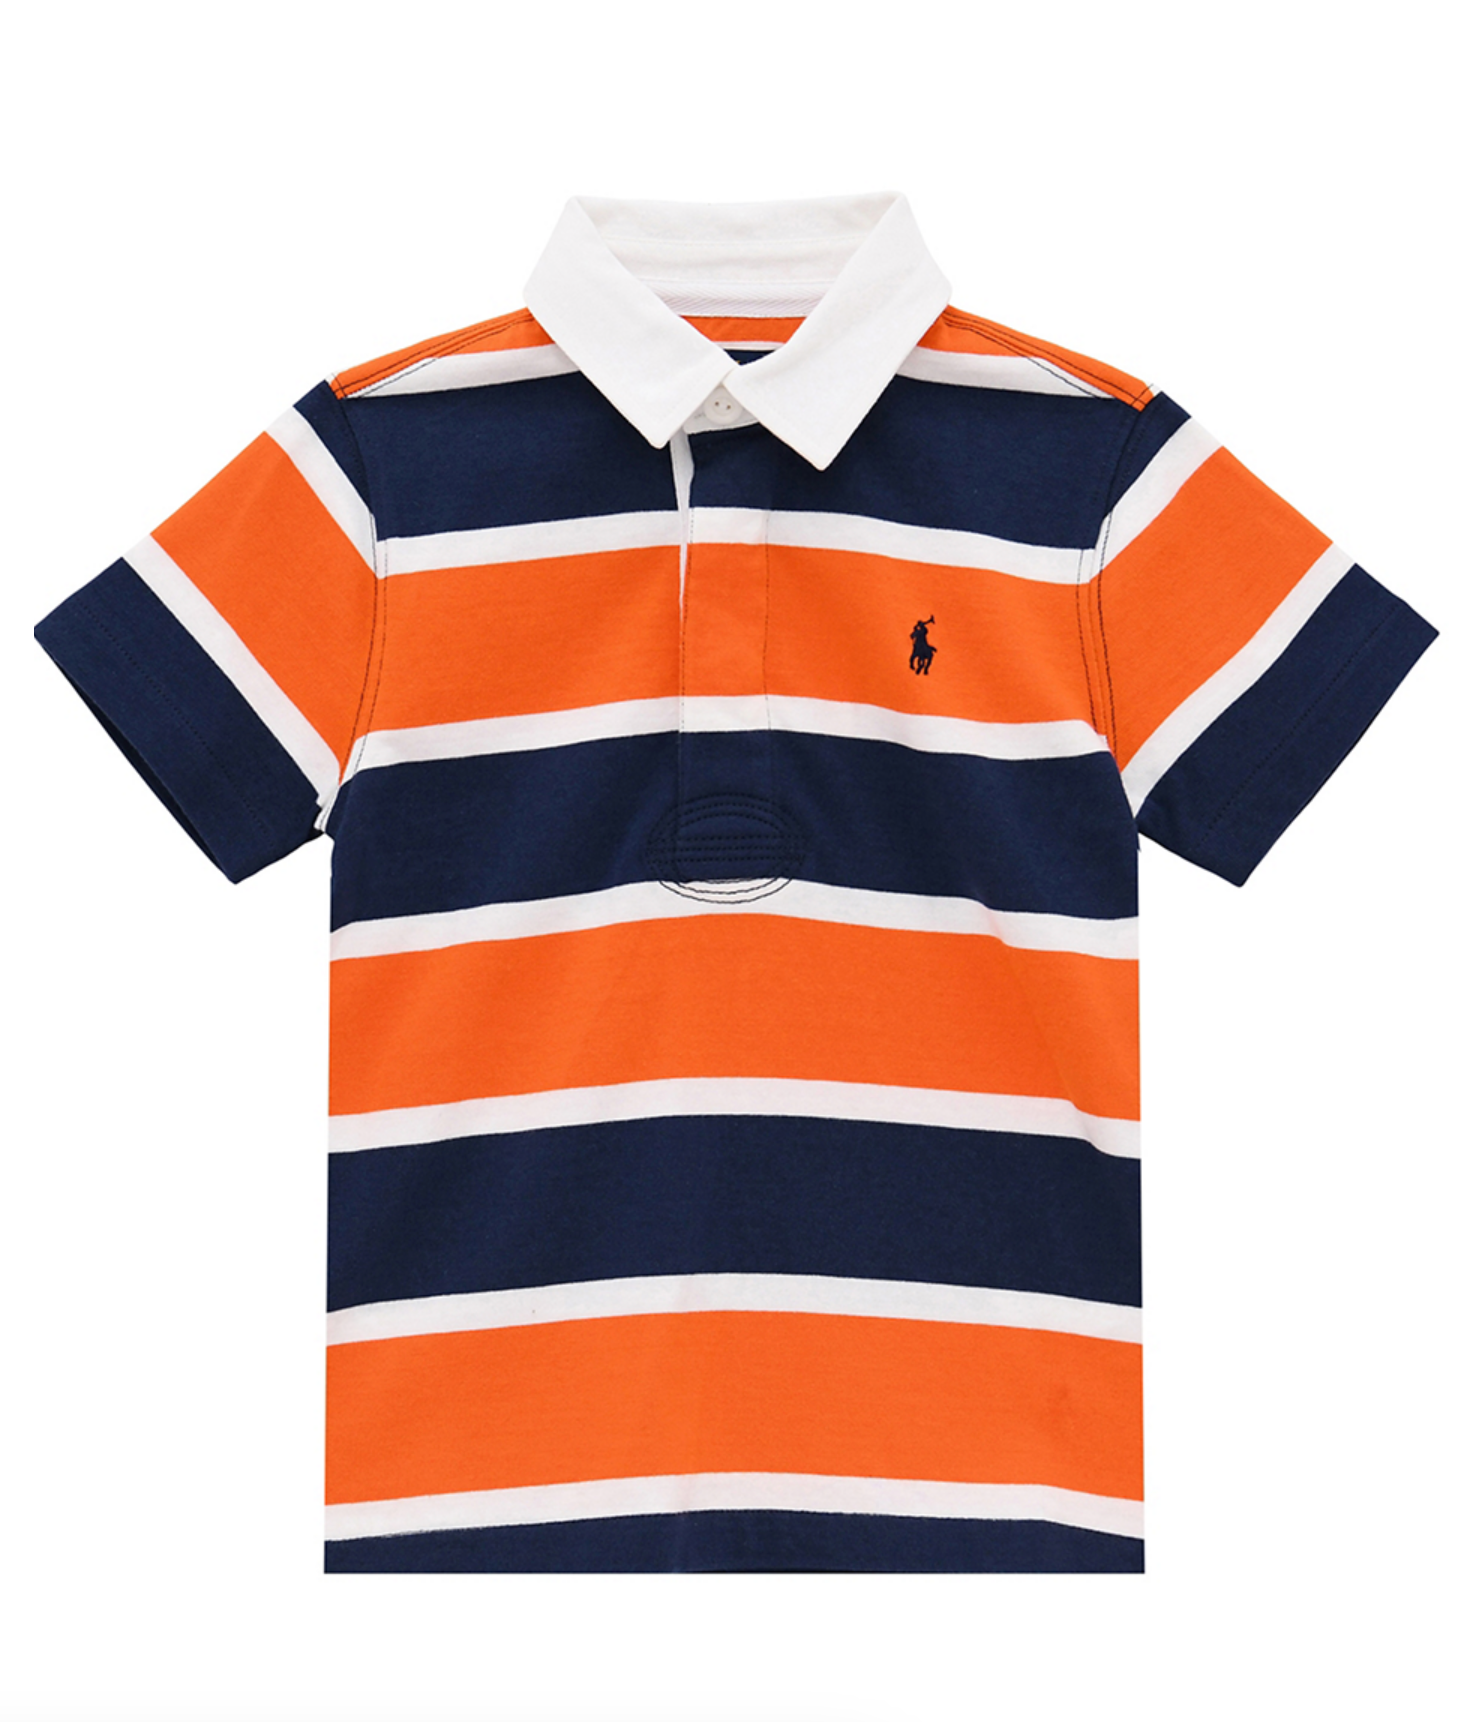 SHORT-SLEEVE COTTON JERSEY RUGBY POLO - MULTI STRIPE